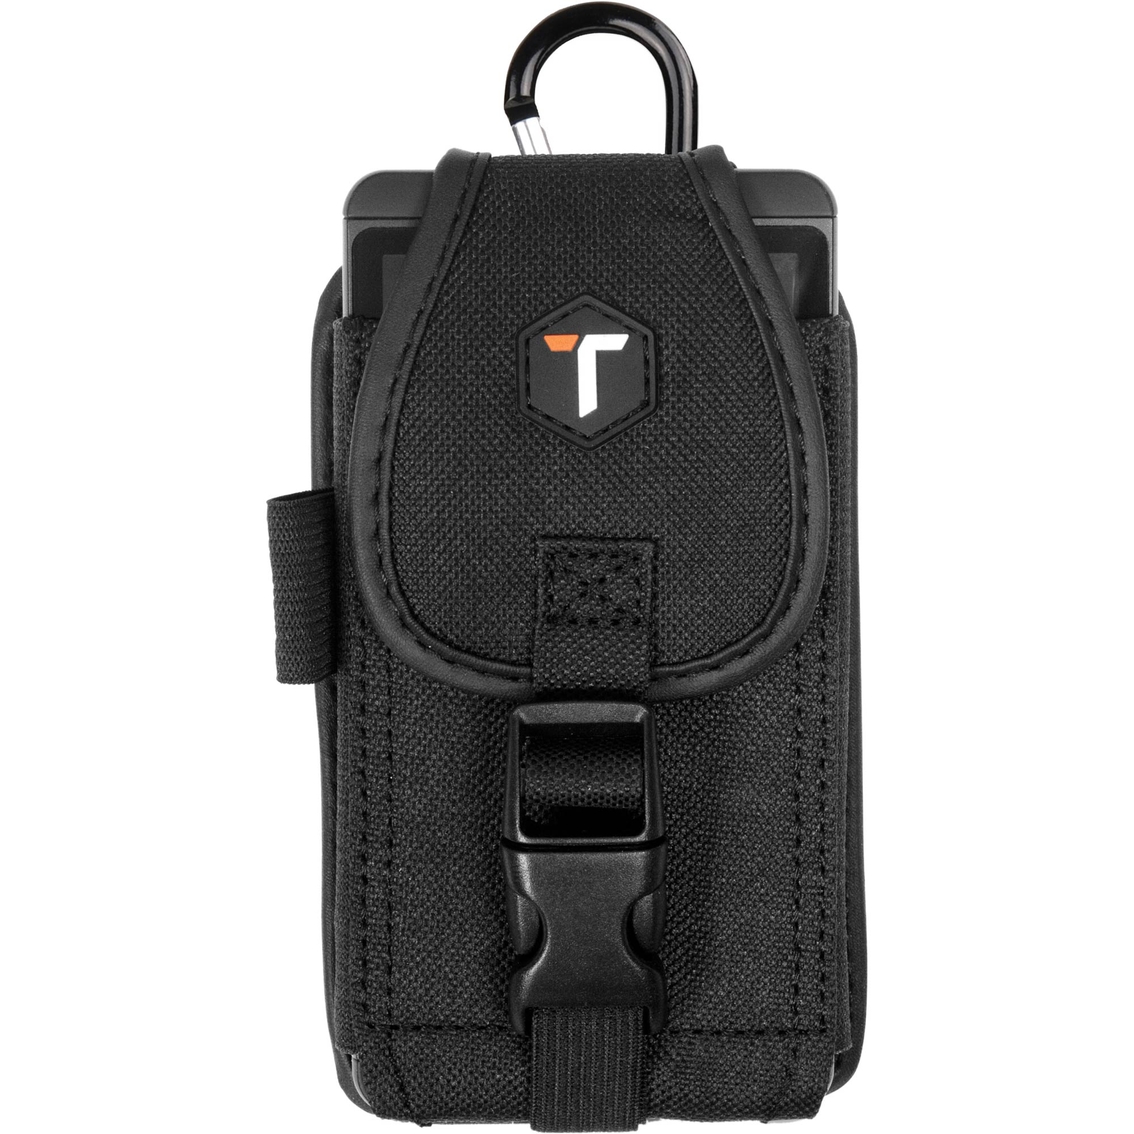 ToughTested Rugged 6 Point Security Phone Case - Image 2 of 2